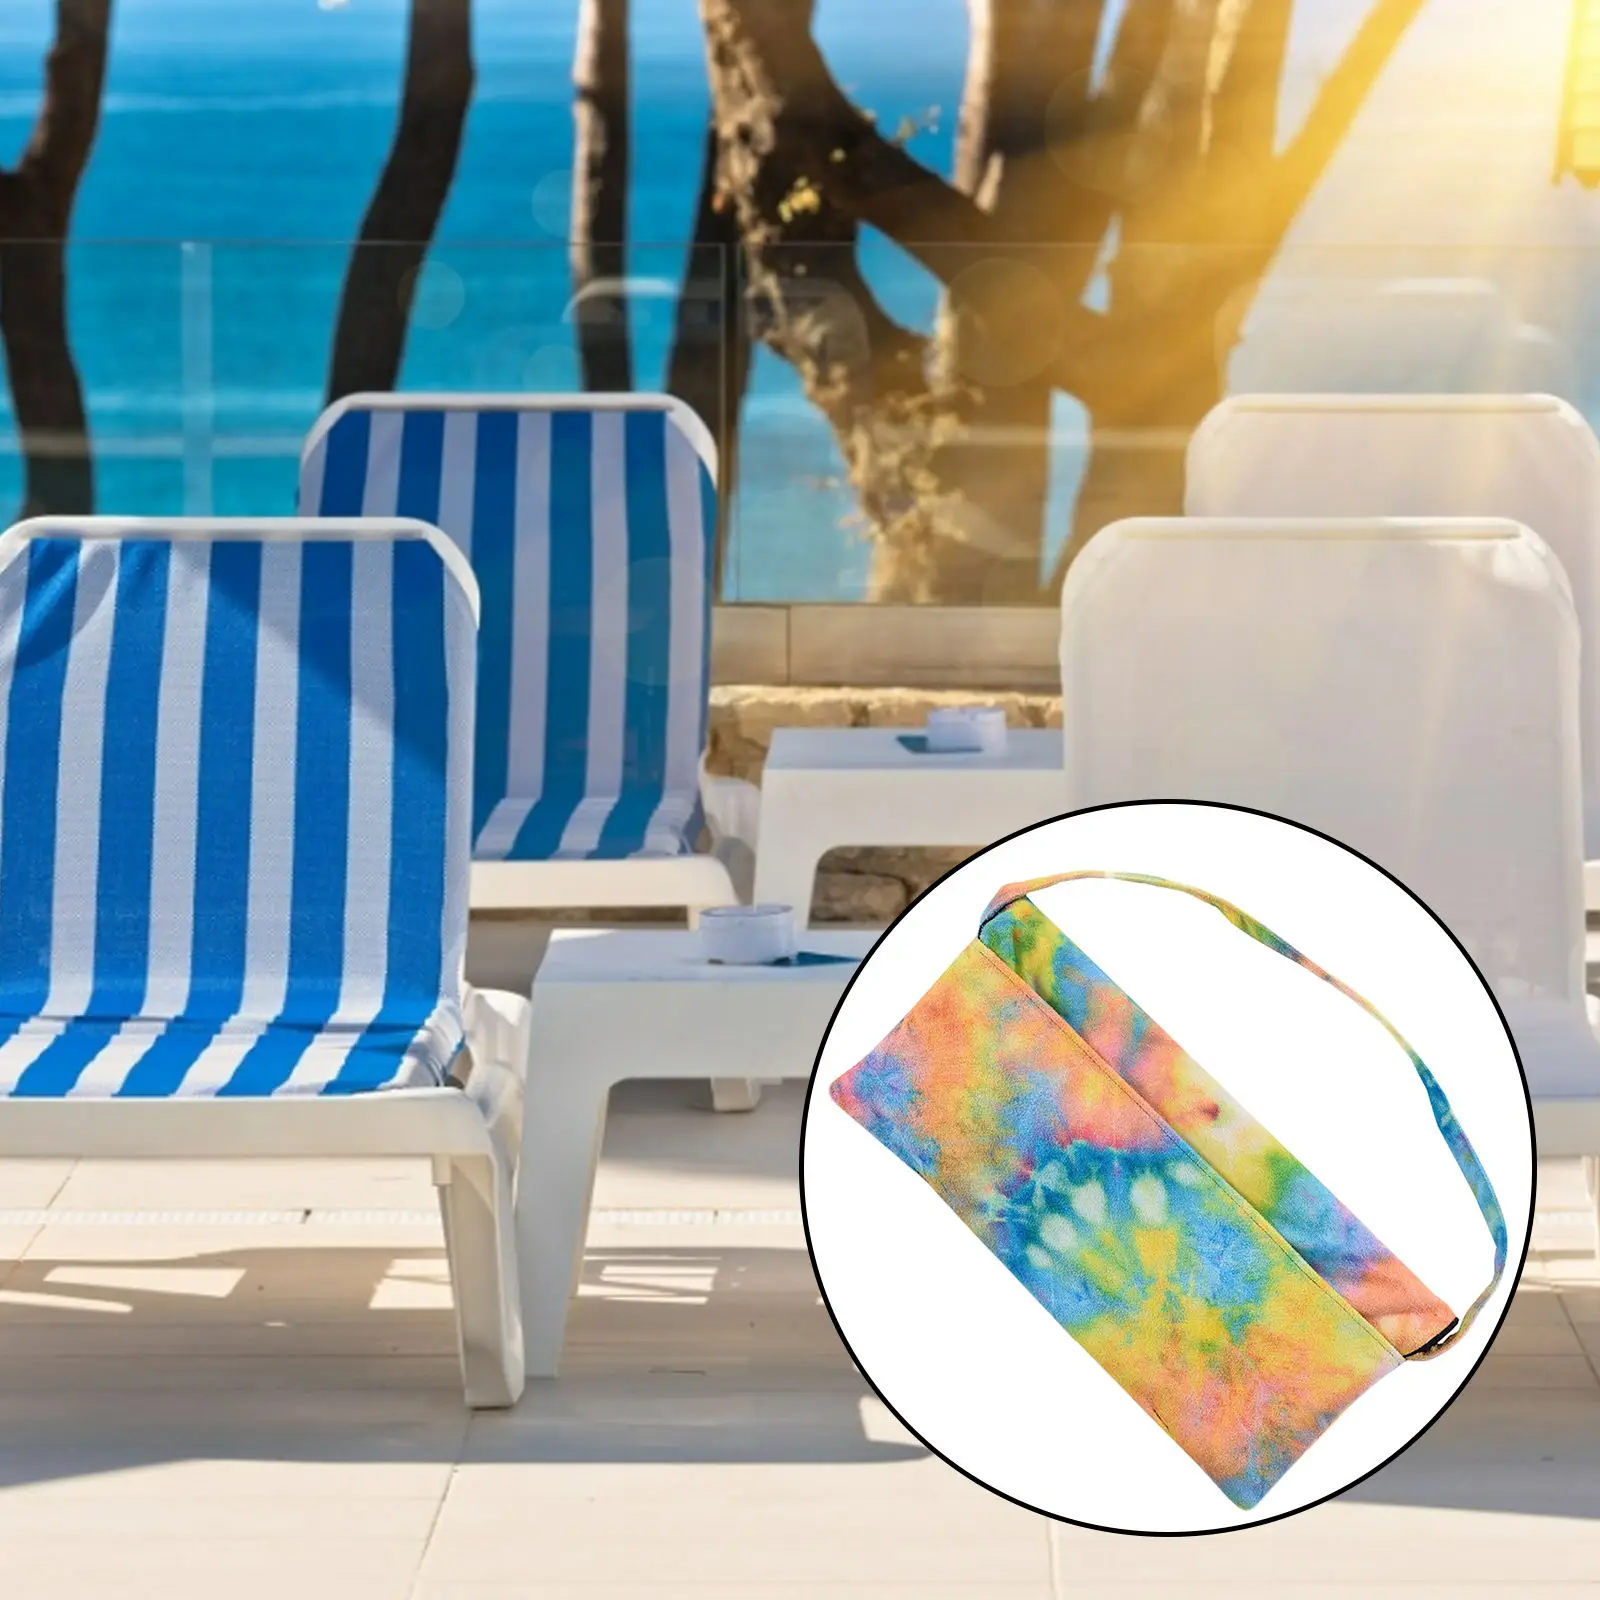 Skin Friendly Lounger Beach Towel Hotel Garden Lazy Lounge Chair Cover Towel Mat with Pockets Seaside Quick Drying Anti Slip